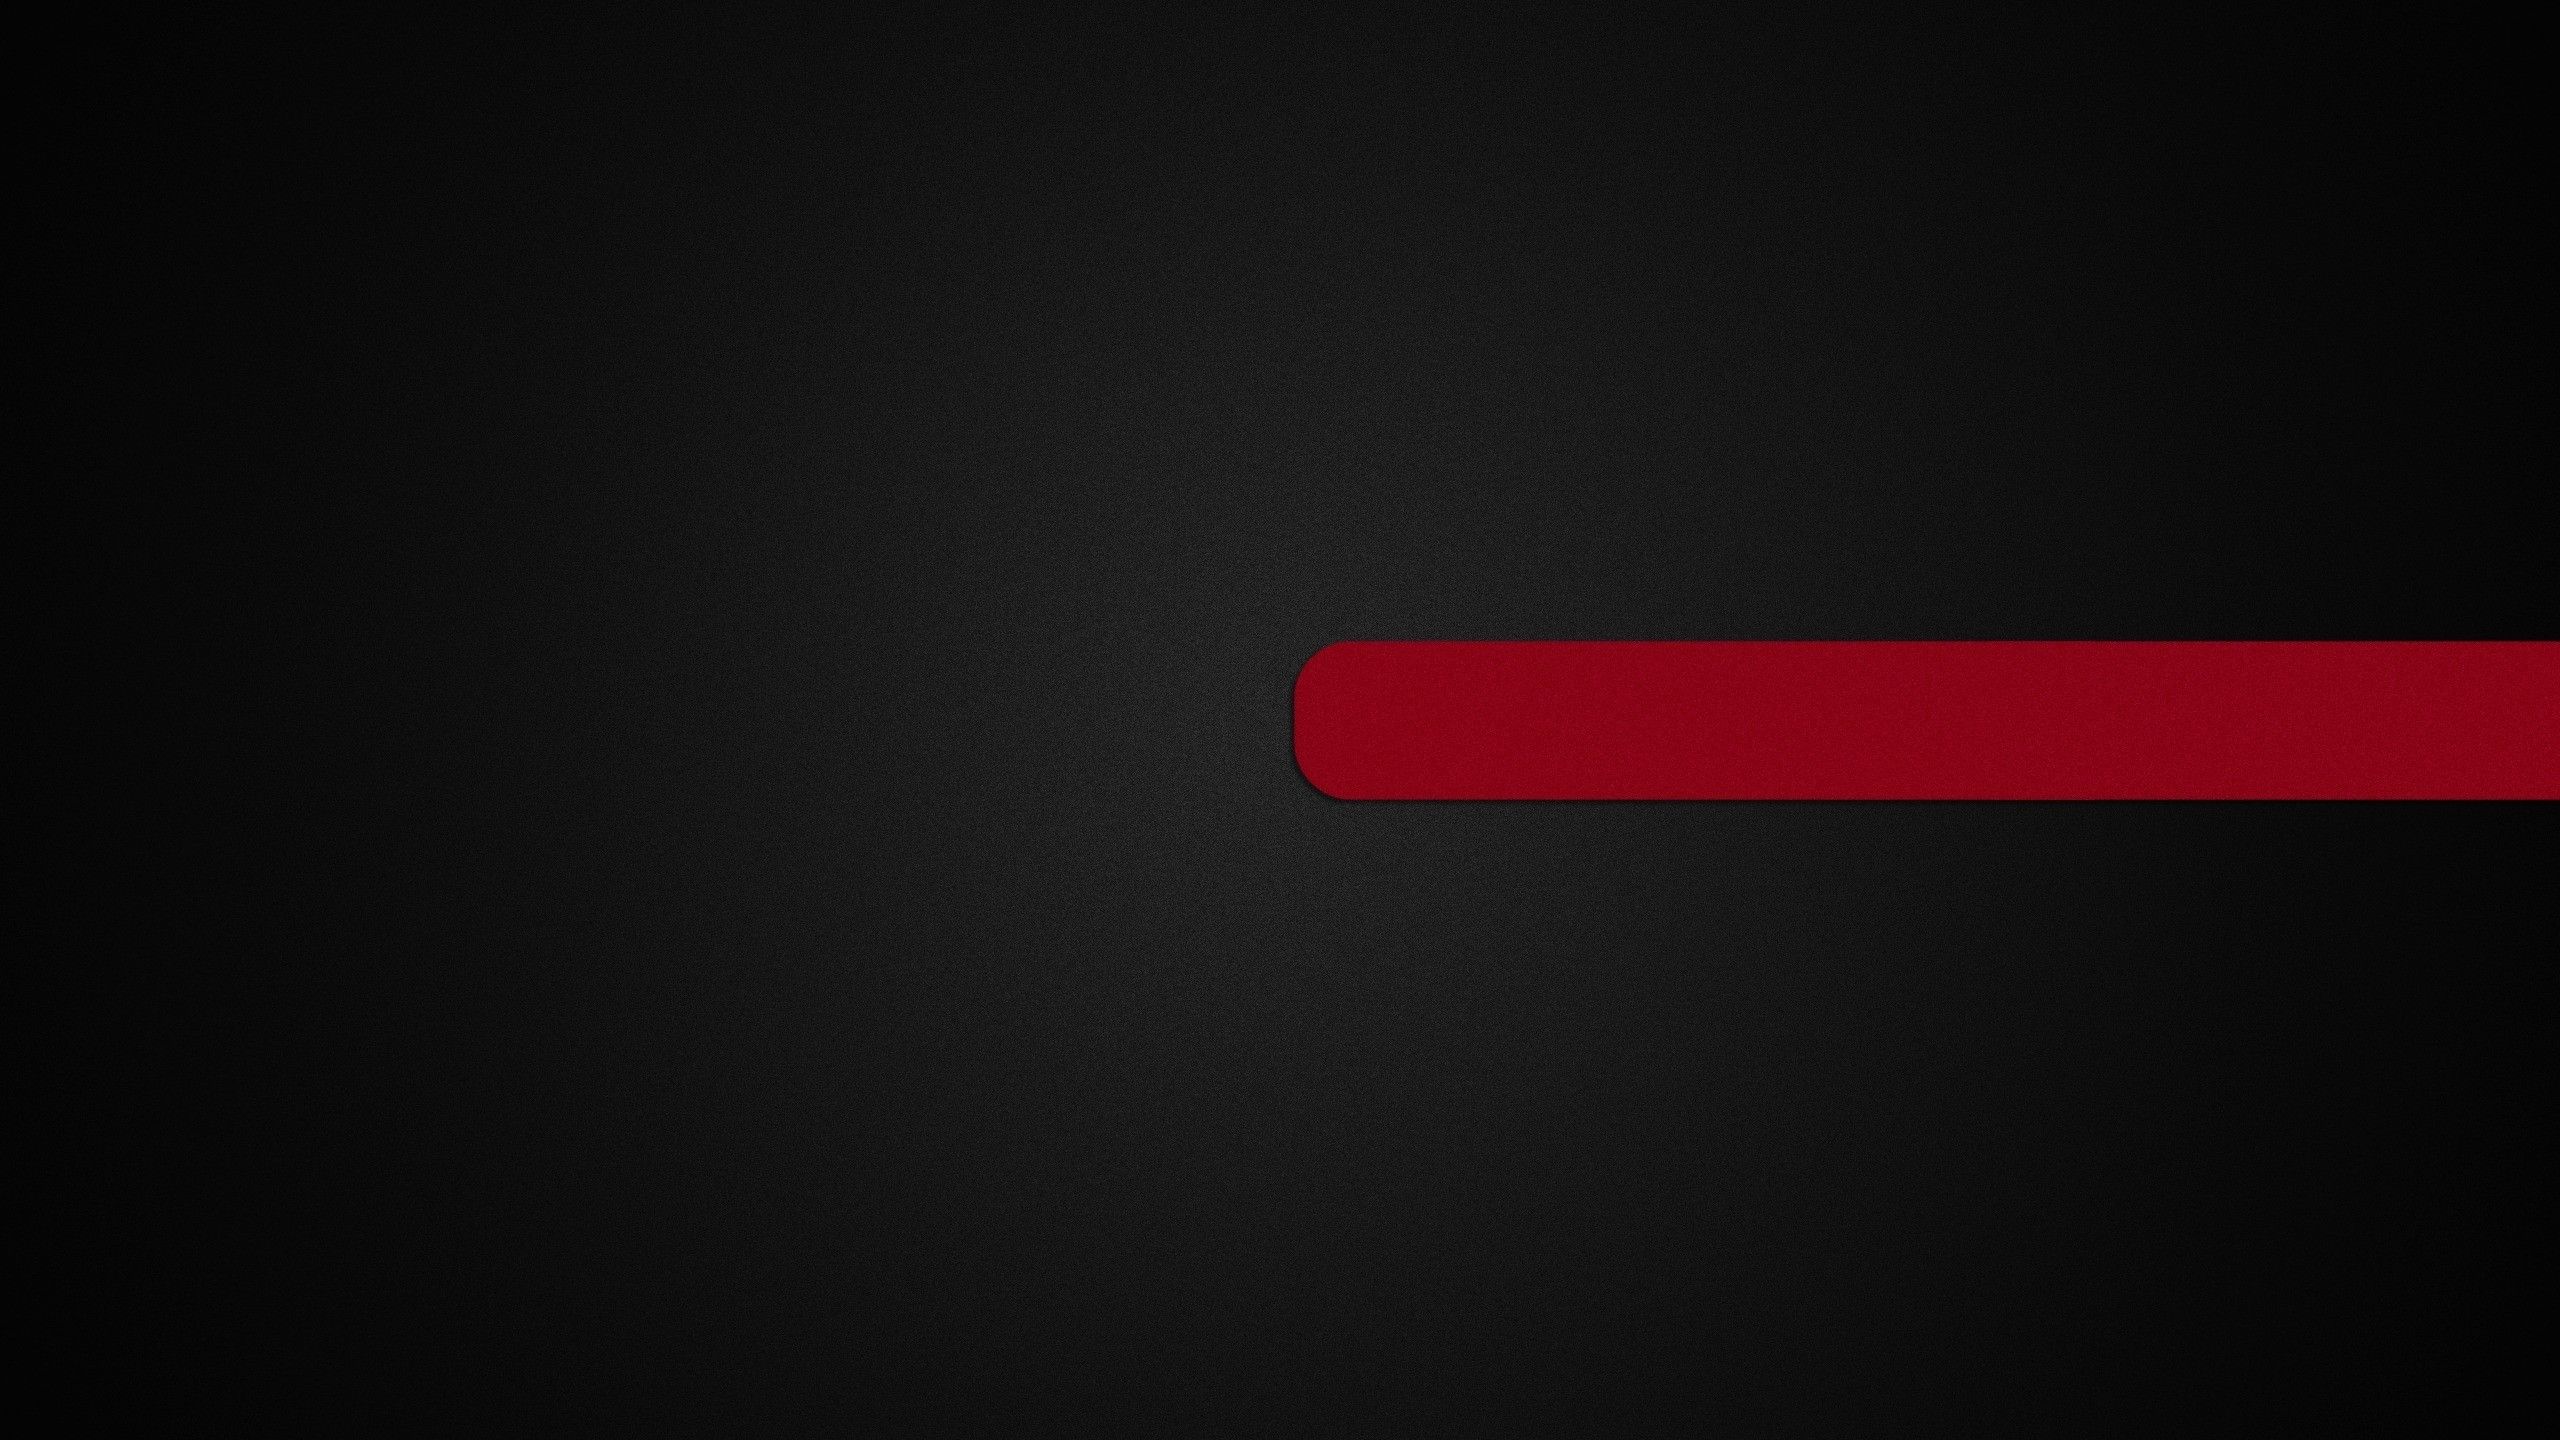 Black And Red Abstract Wallpaper 12 2560x1440